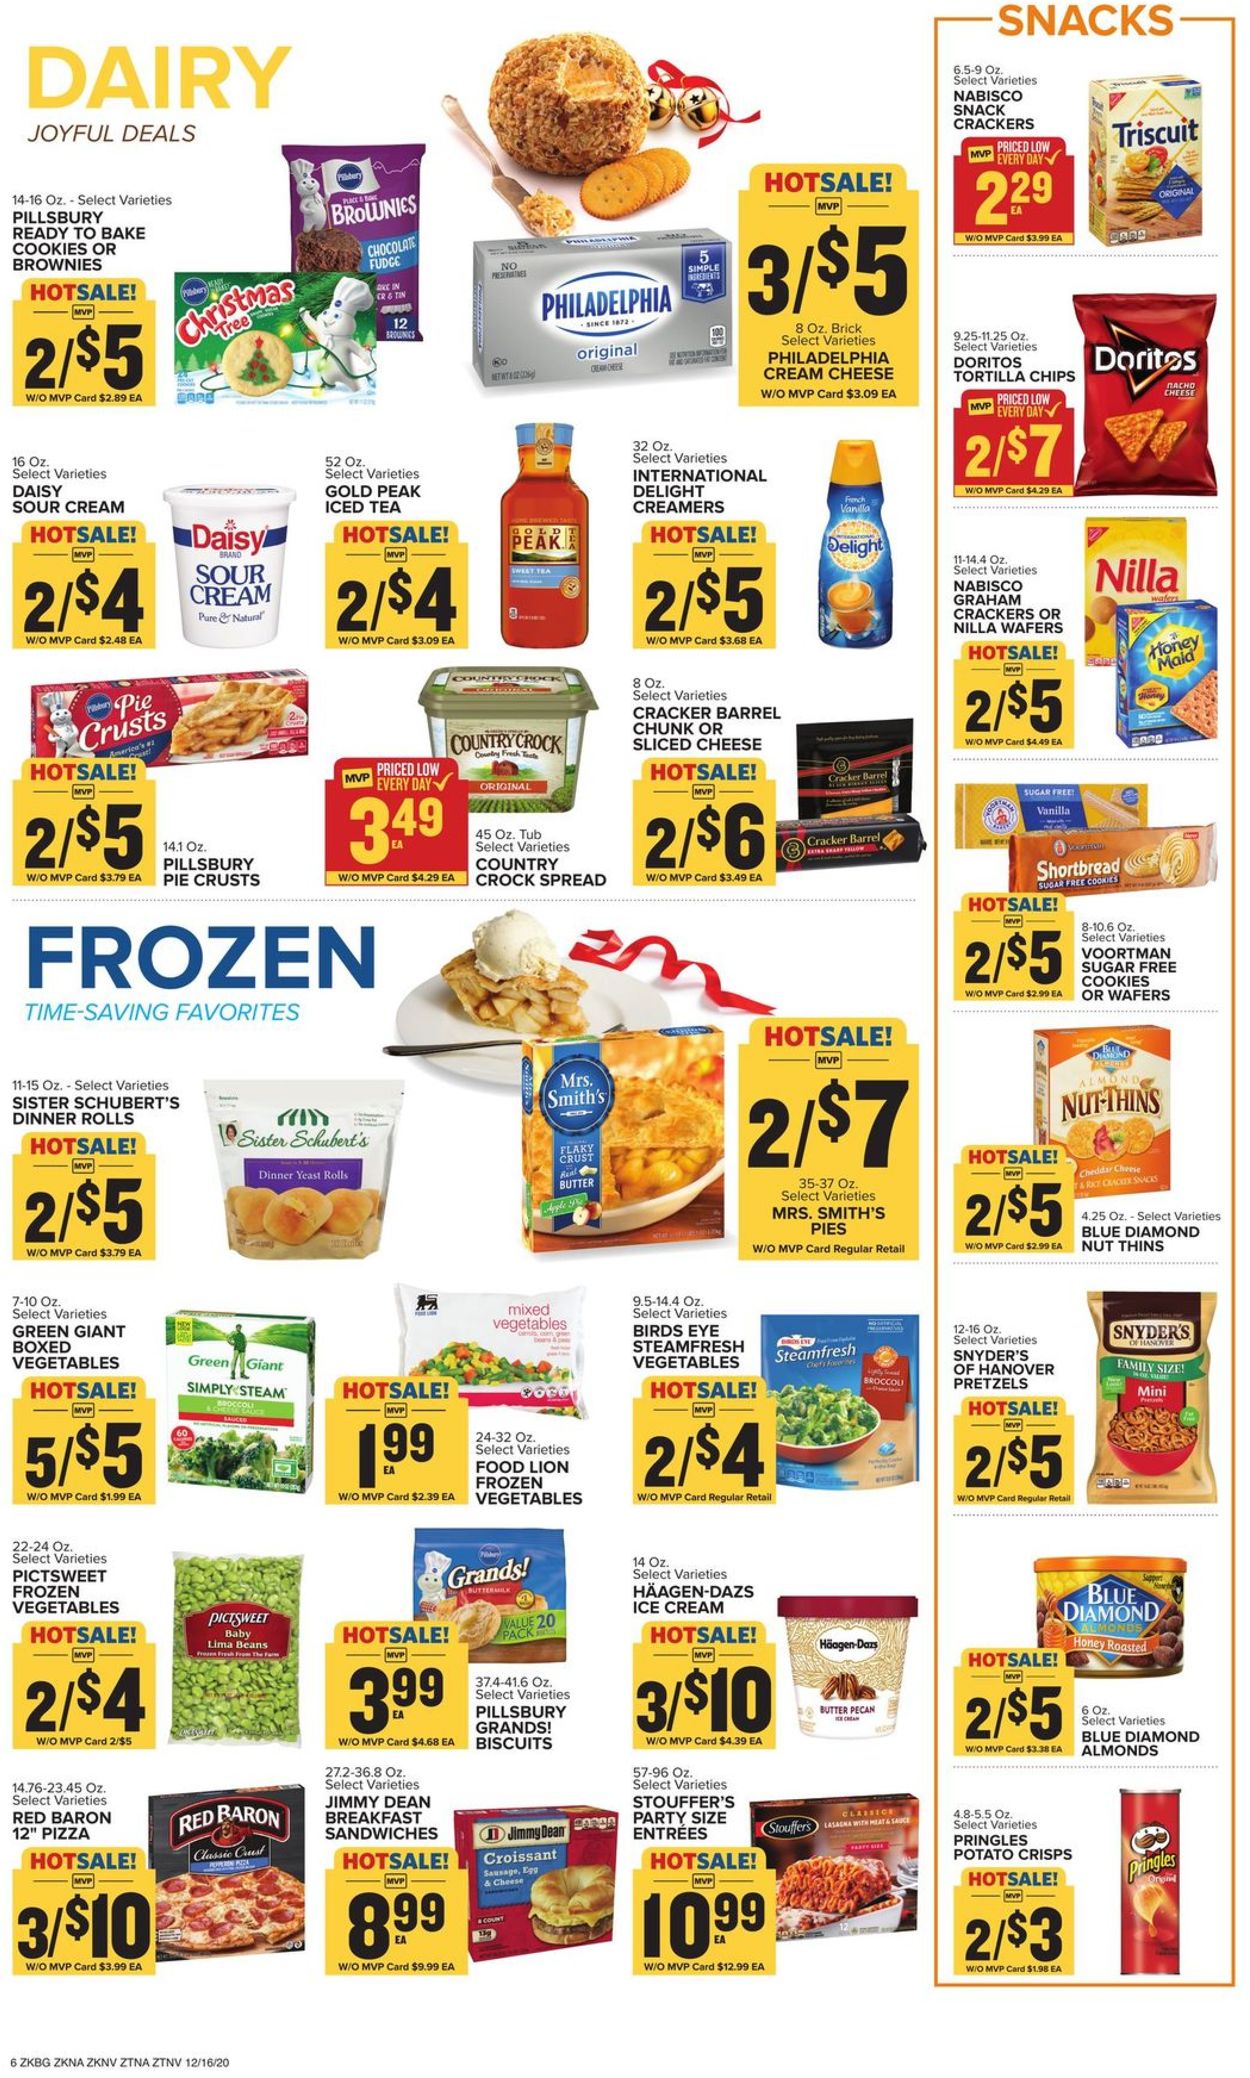 food lion holiday gift boxes